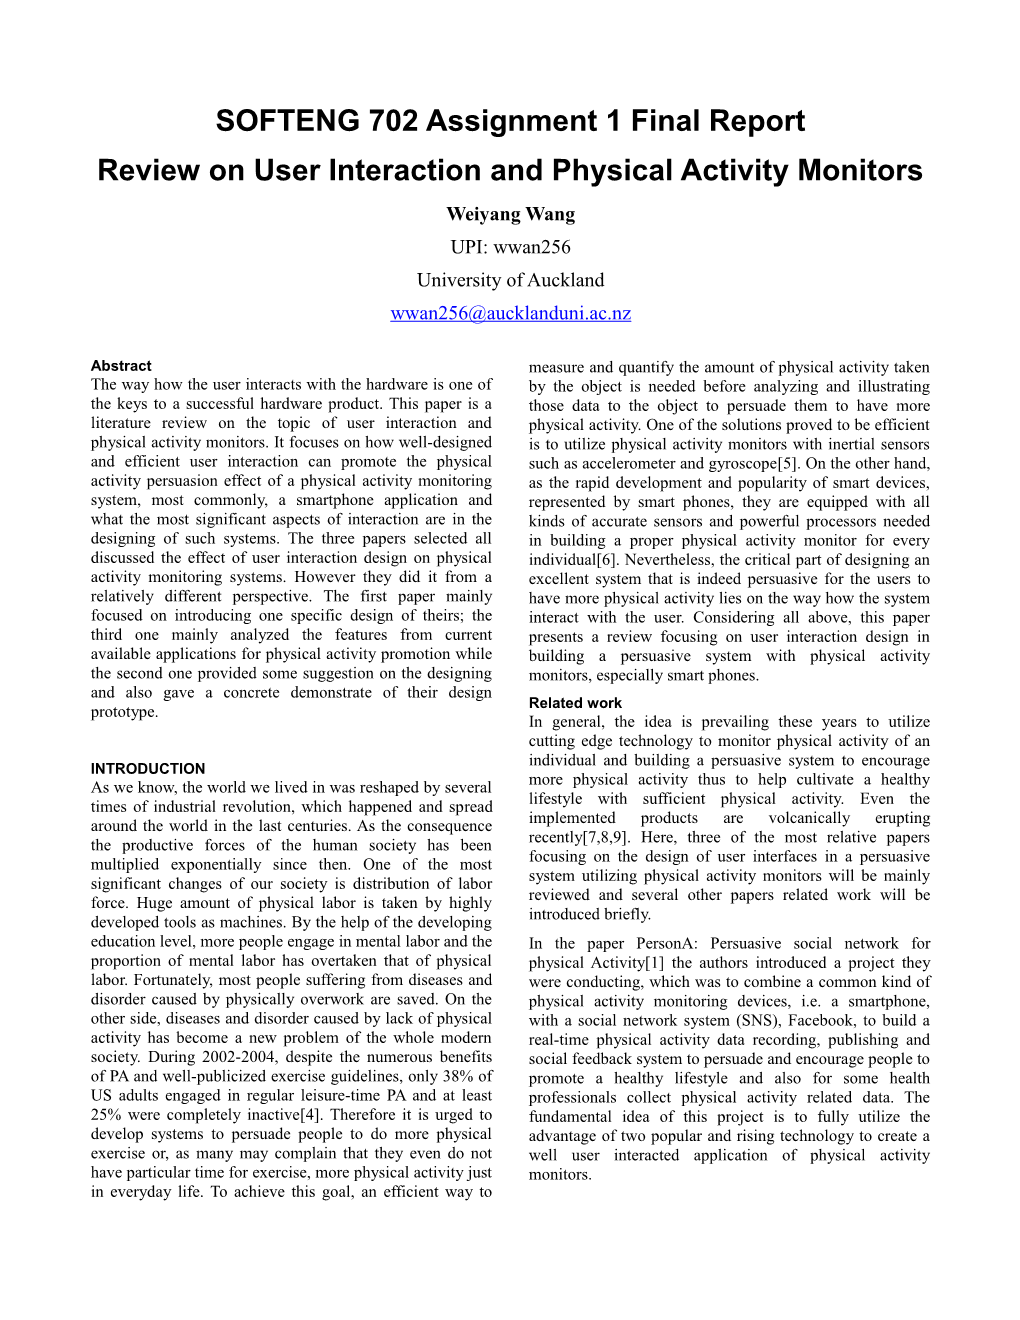 Review on User Interaction and Physical Activity Monitors